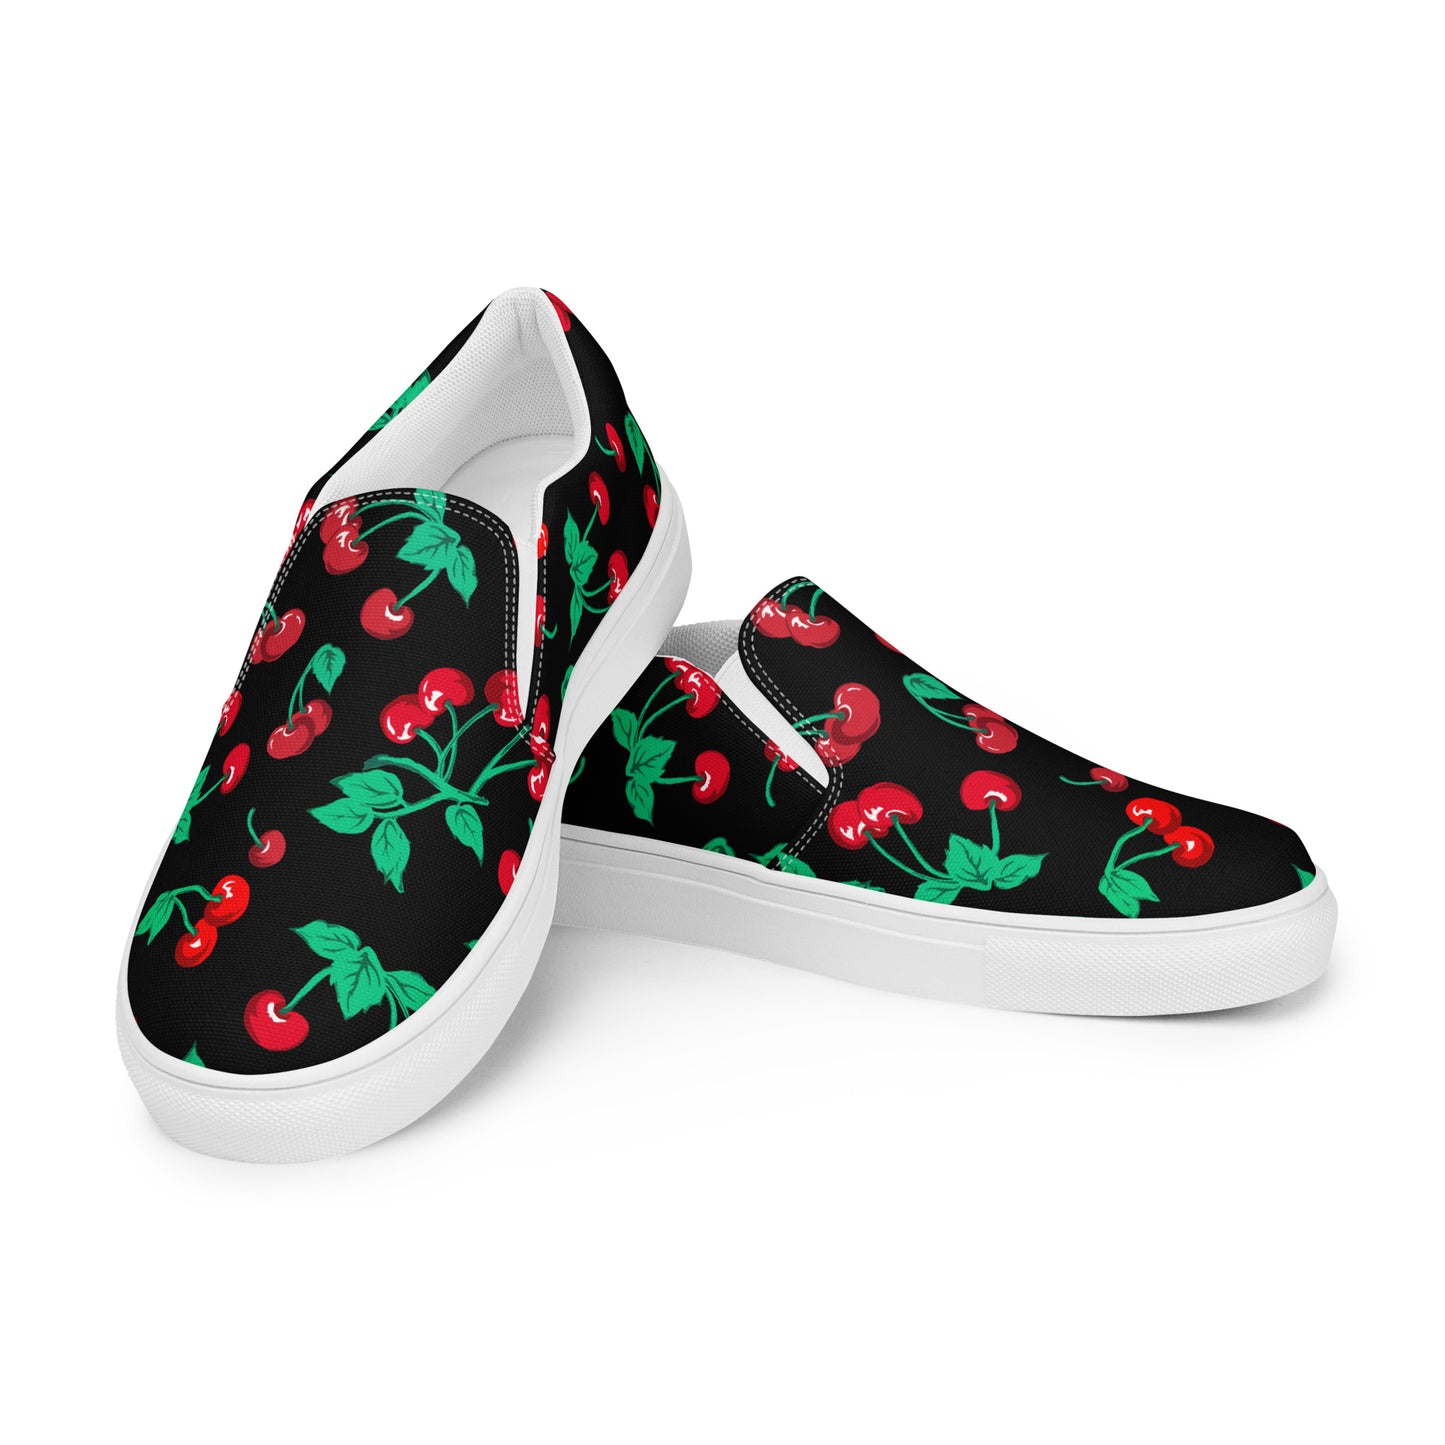 Black Coffee Cherry Girl Print Women’s Canvas Slip-On Deck Shoes | Pinup Couture Relaxed